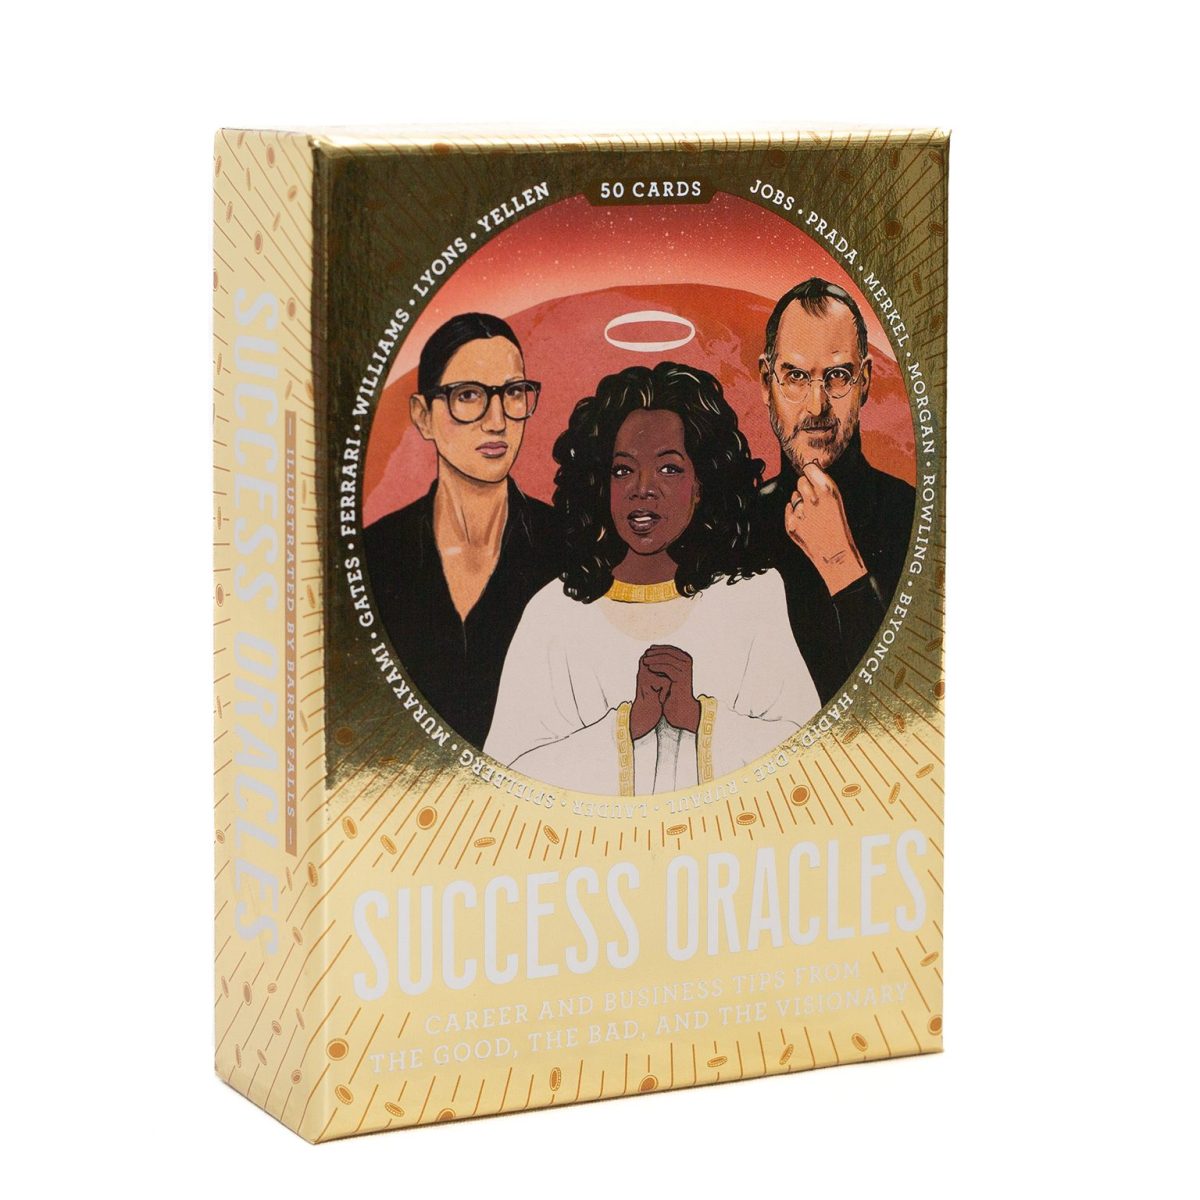 Gold Success oracles card box with Oprah and Steve Jobs on the cover